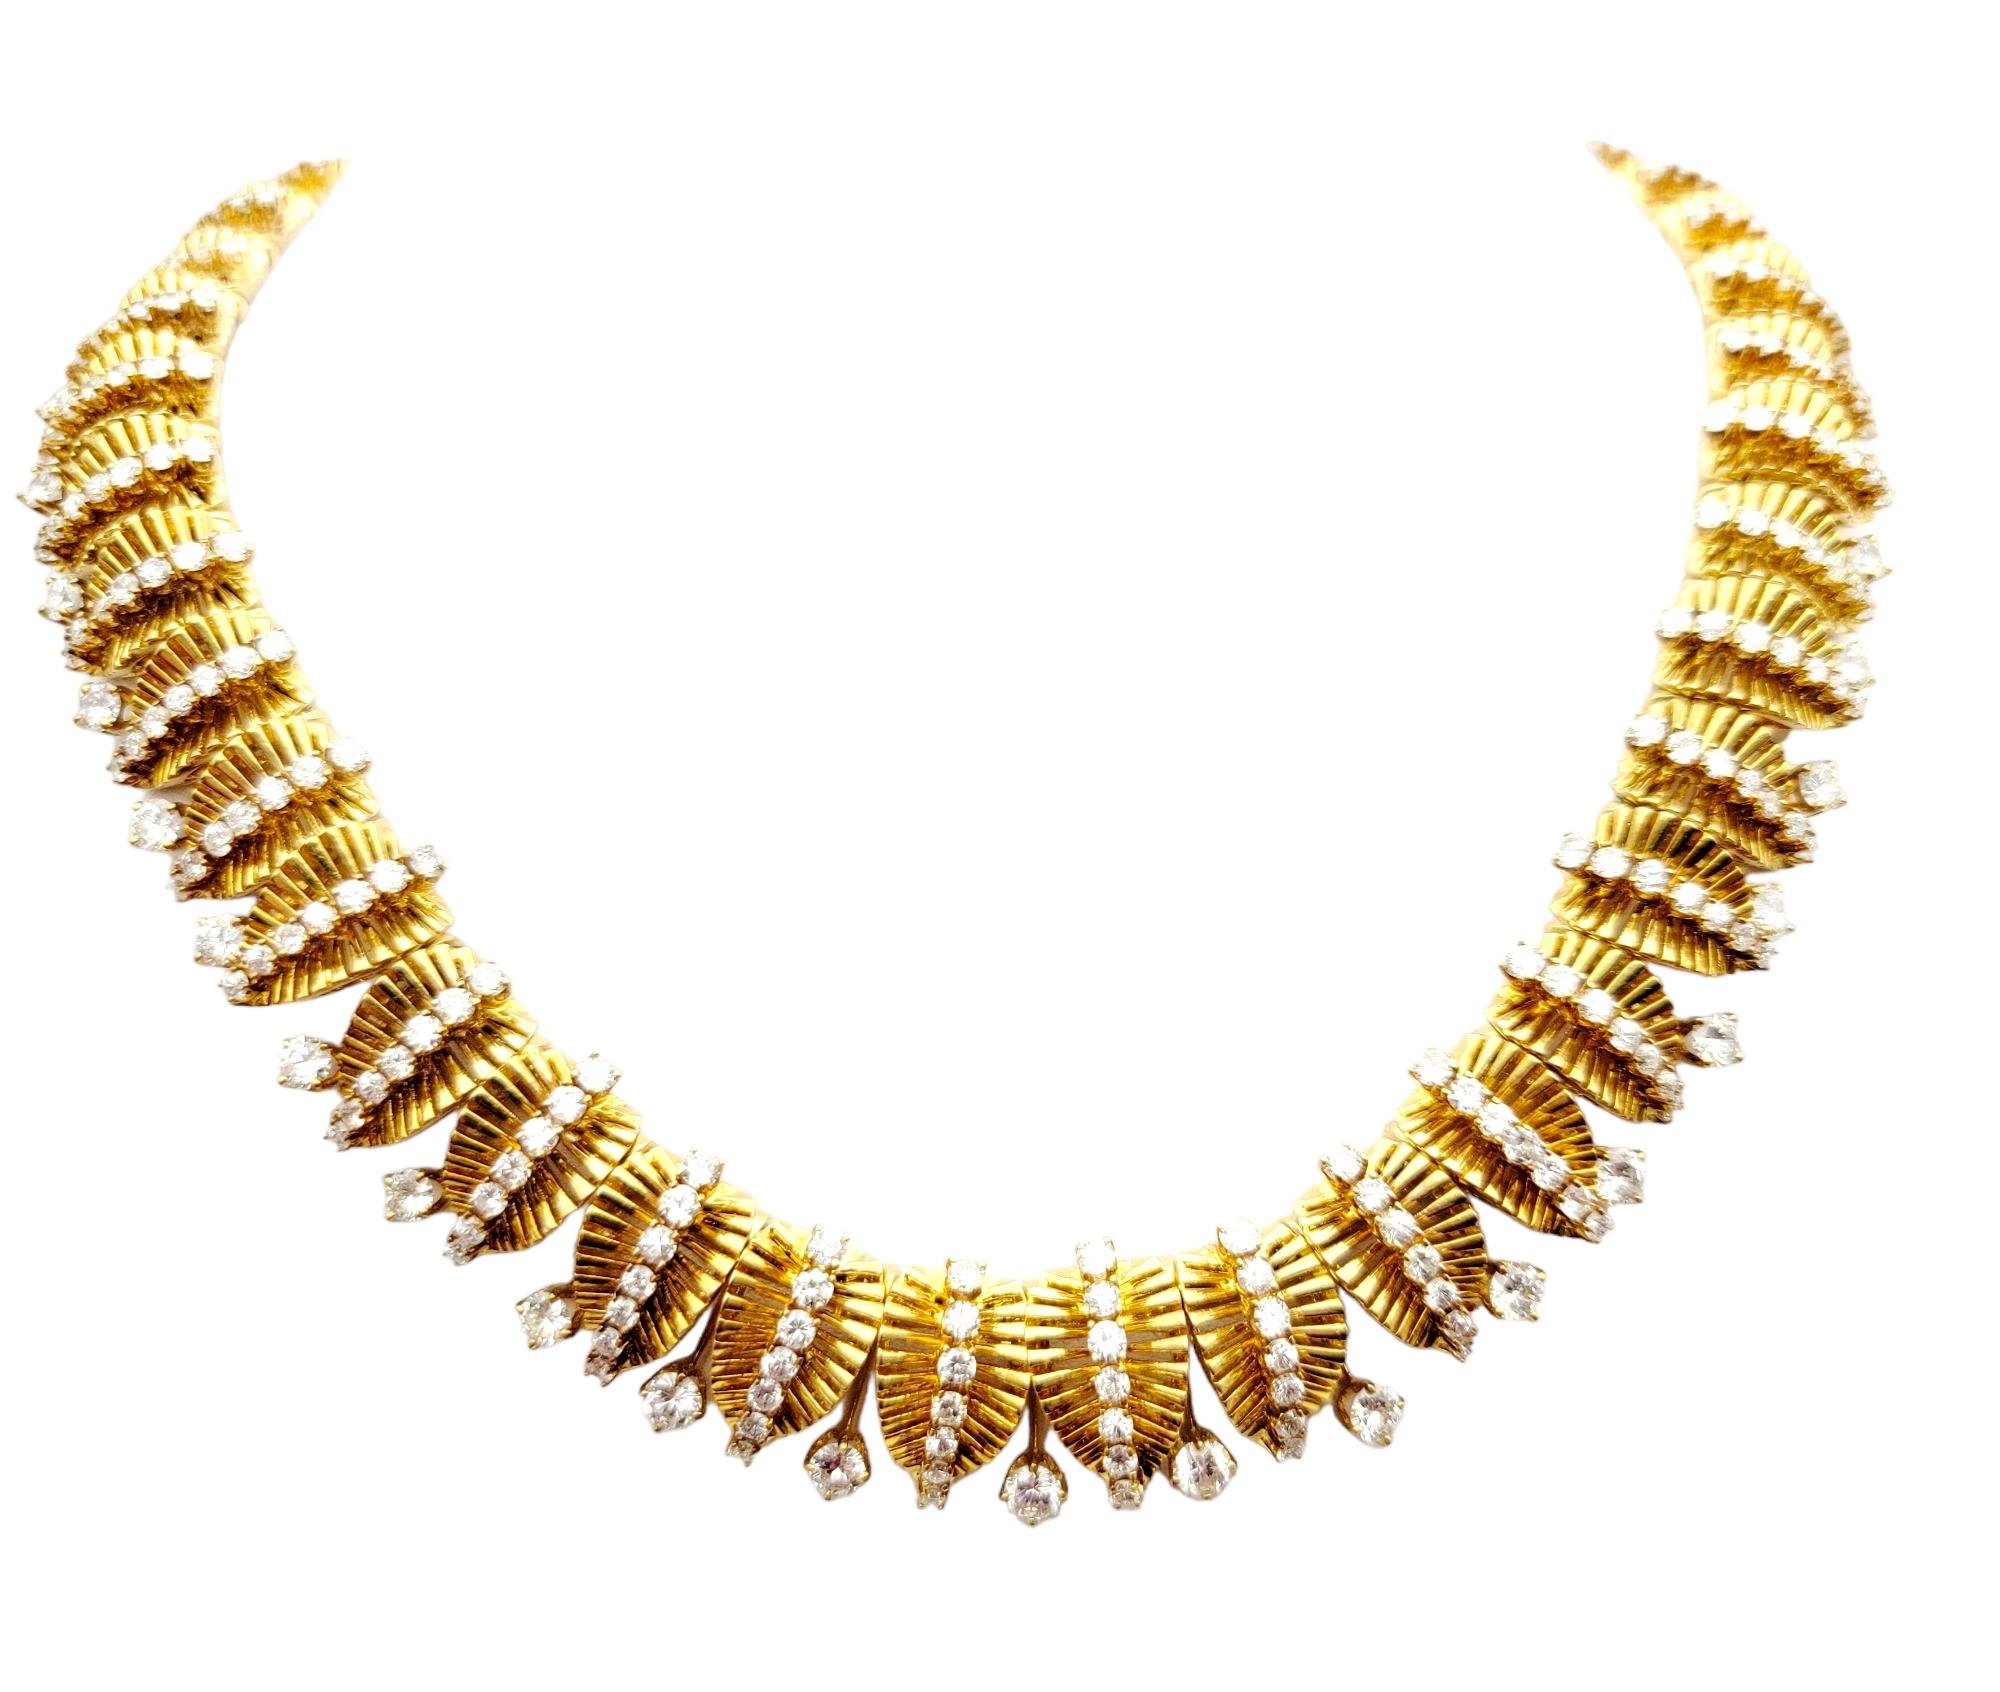 This is an absolute showstopper of a necklace! This incredible diamond choker is expertly designed for an extravagant look, wrapping the neck in sparkling luxury.

This stunning polished 18 karat yellow gold choker style necklace features a